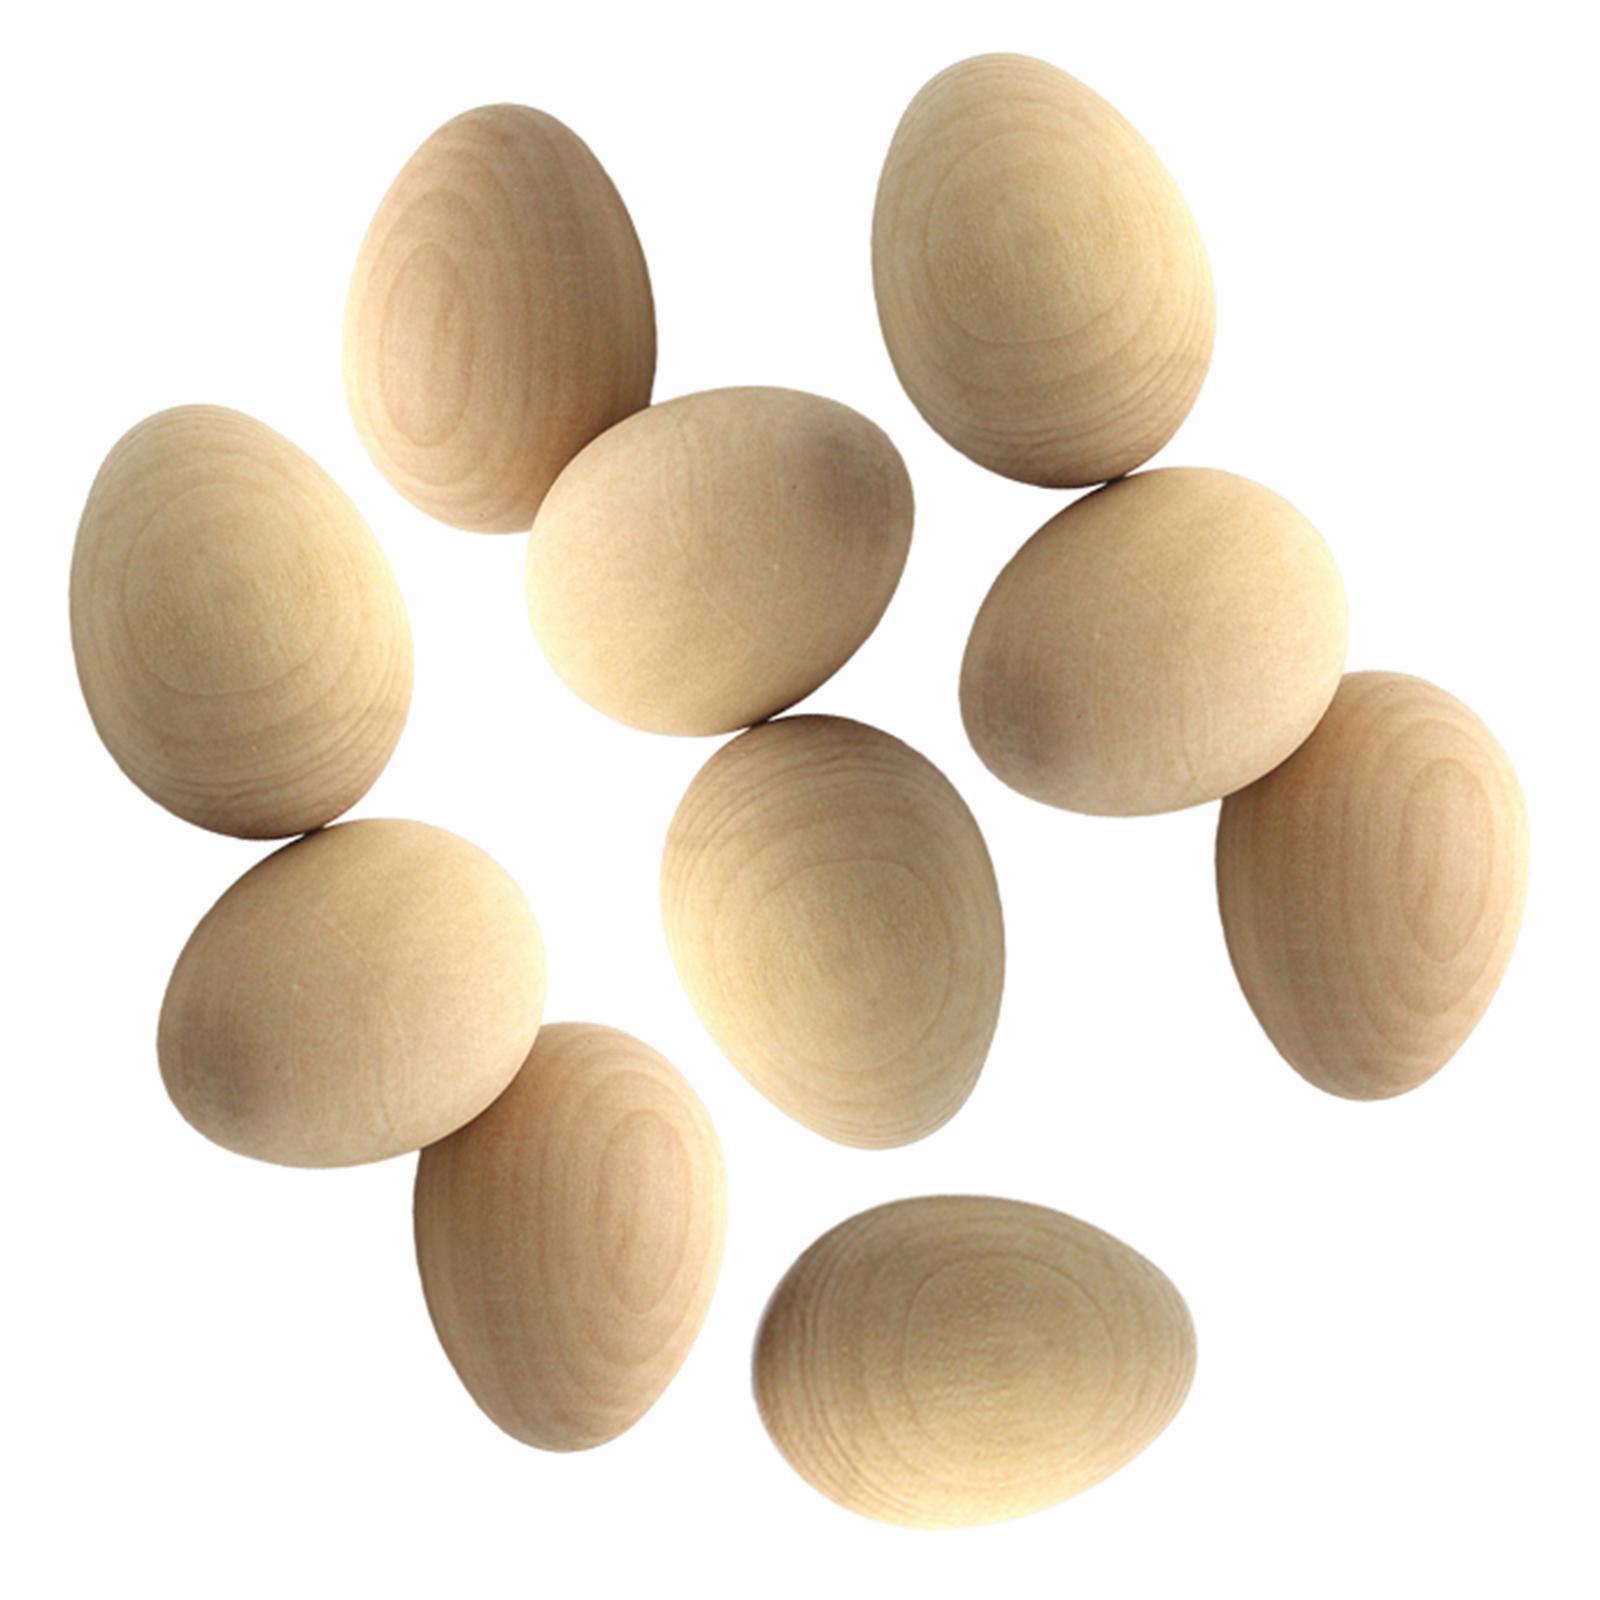 10Pcs Smooth DIY Wood Easter Egg Fake Eggs Wooden Blank Eggs for ...